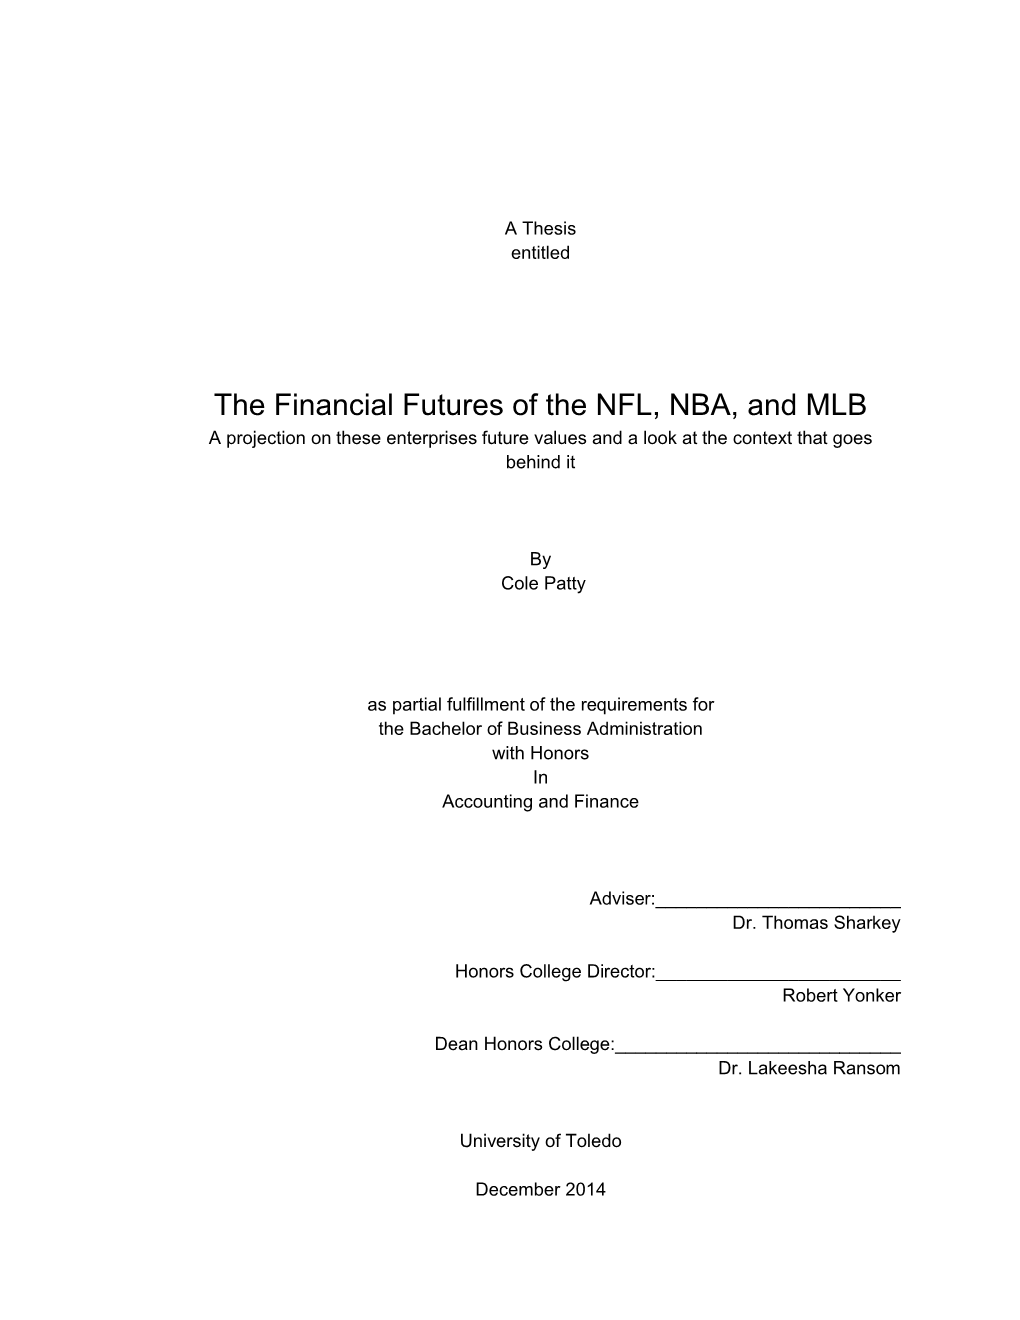 The Financial Futures of the NFL, NBA, and MLB a Projection on These Enterprises Future Values and a Look at the Context That Goes Behind It